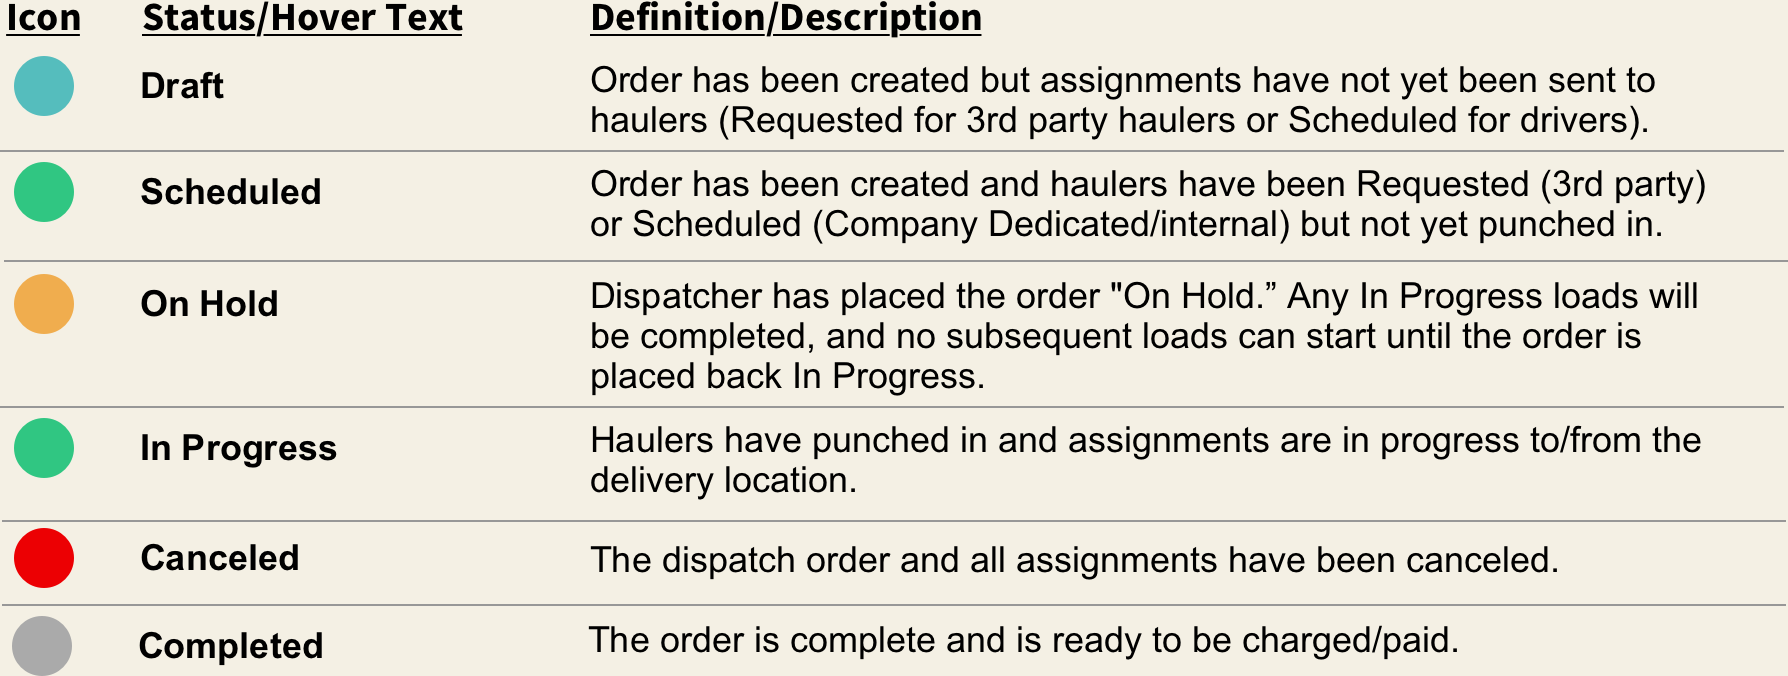 Dispatch_Order_Status_Options_NEW.png